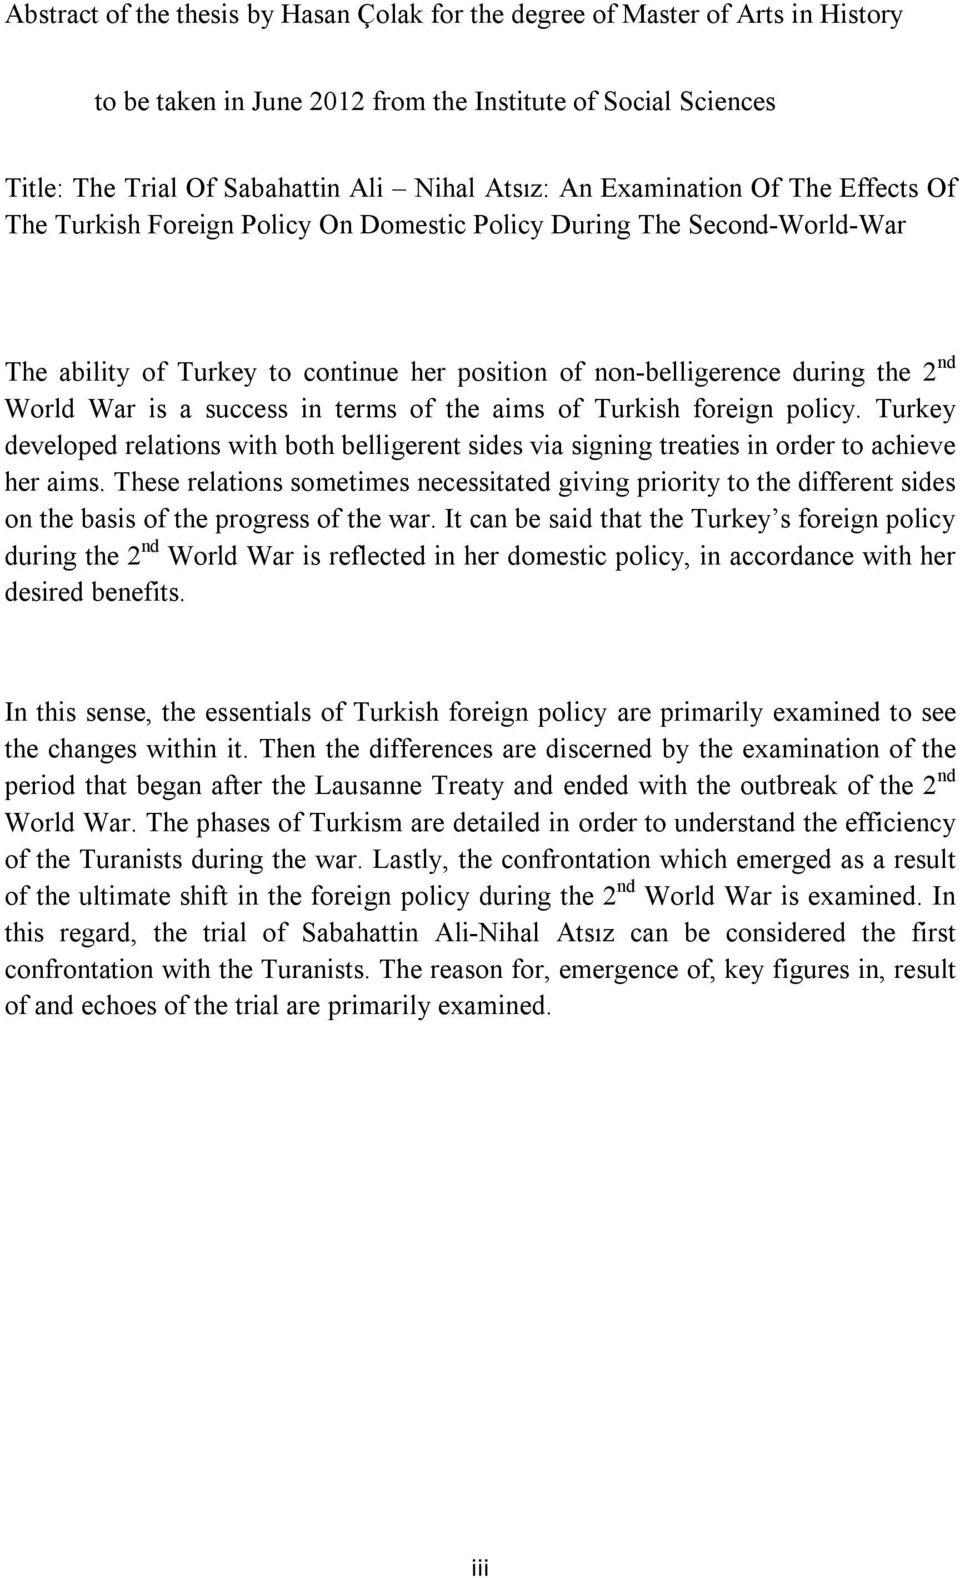 a success in terms of the aims of Turkish foreign policy. Turkey developed relations with both belligerent sides via signing treaties in order to achieve her aims.